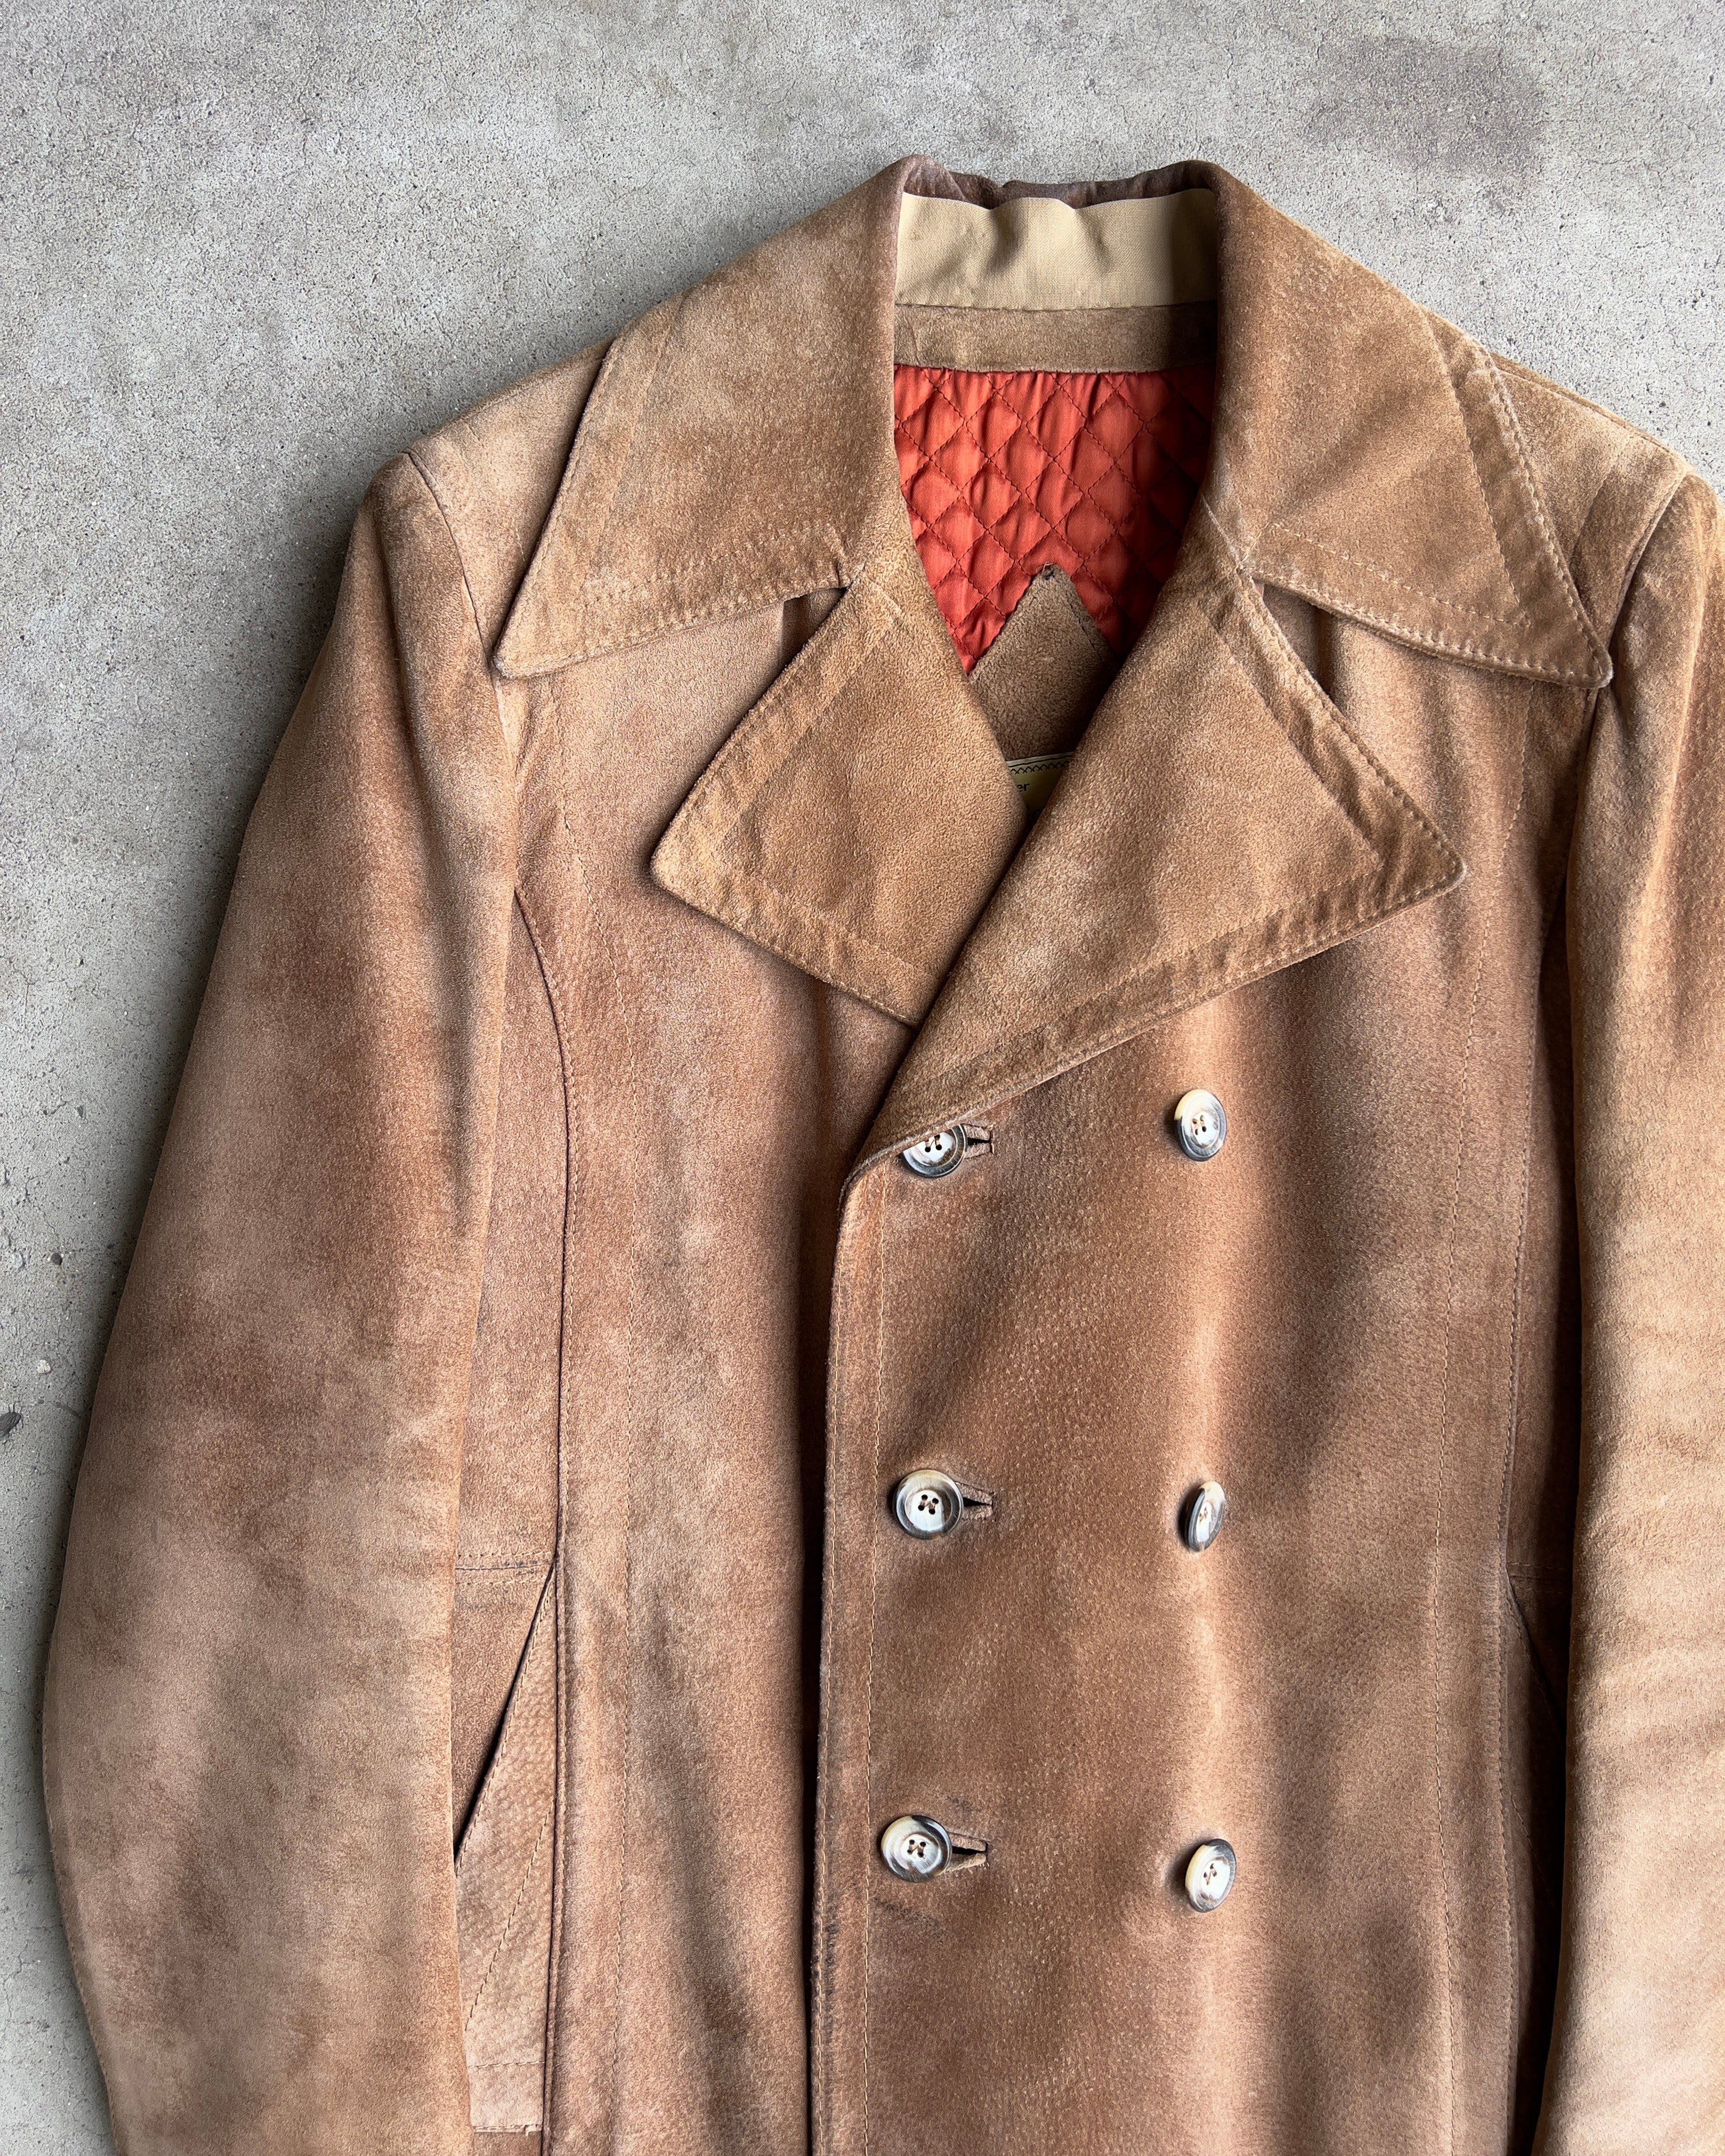 ThreadCount | Vintage 1960s Genuine Suede Leather Satin Lined